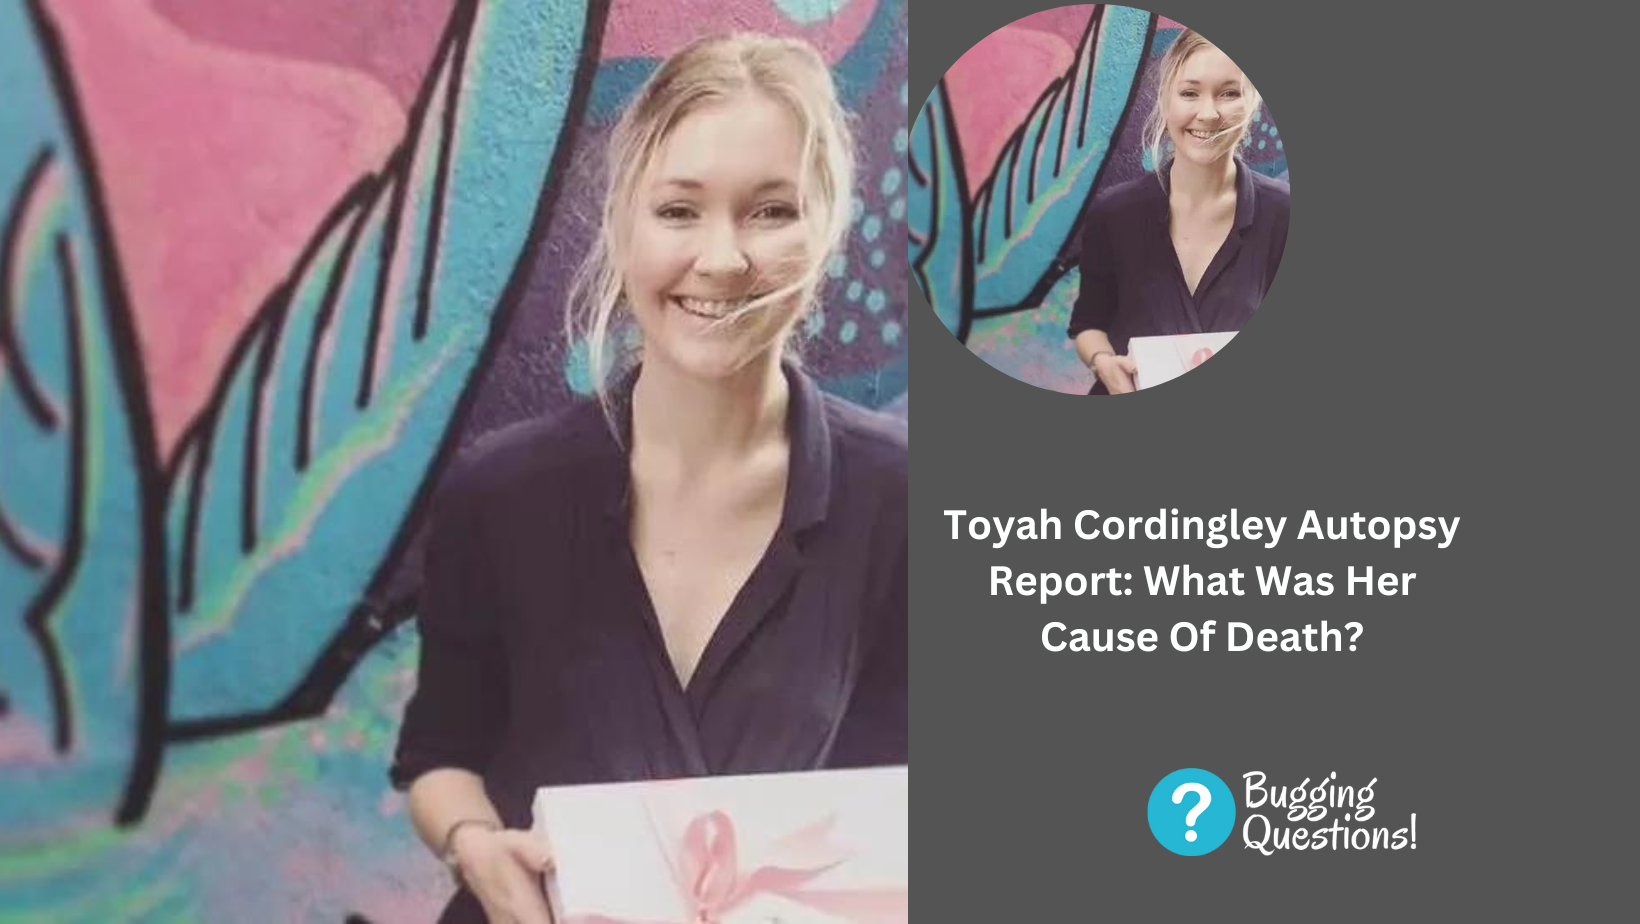 Toyah Cordingley Autopsy Report: What Was Her Cause Of Death?